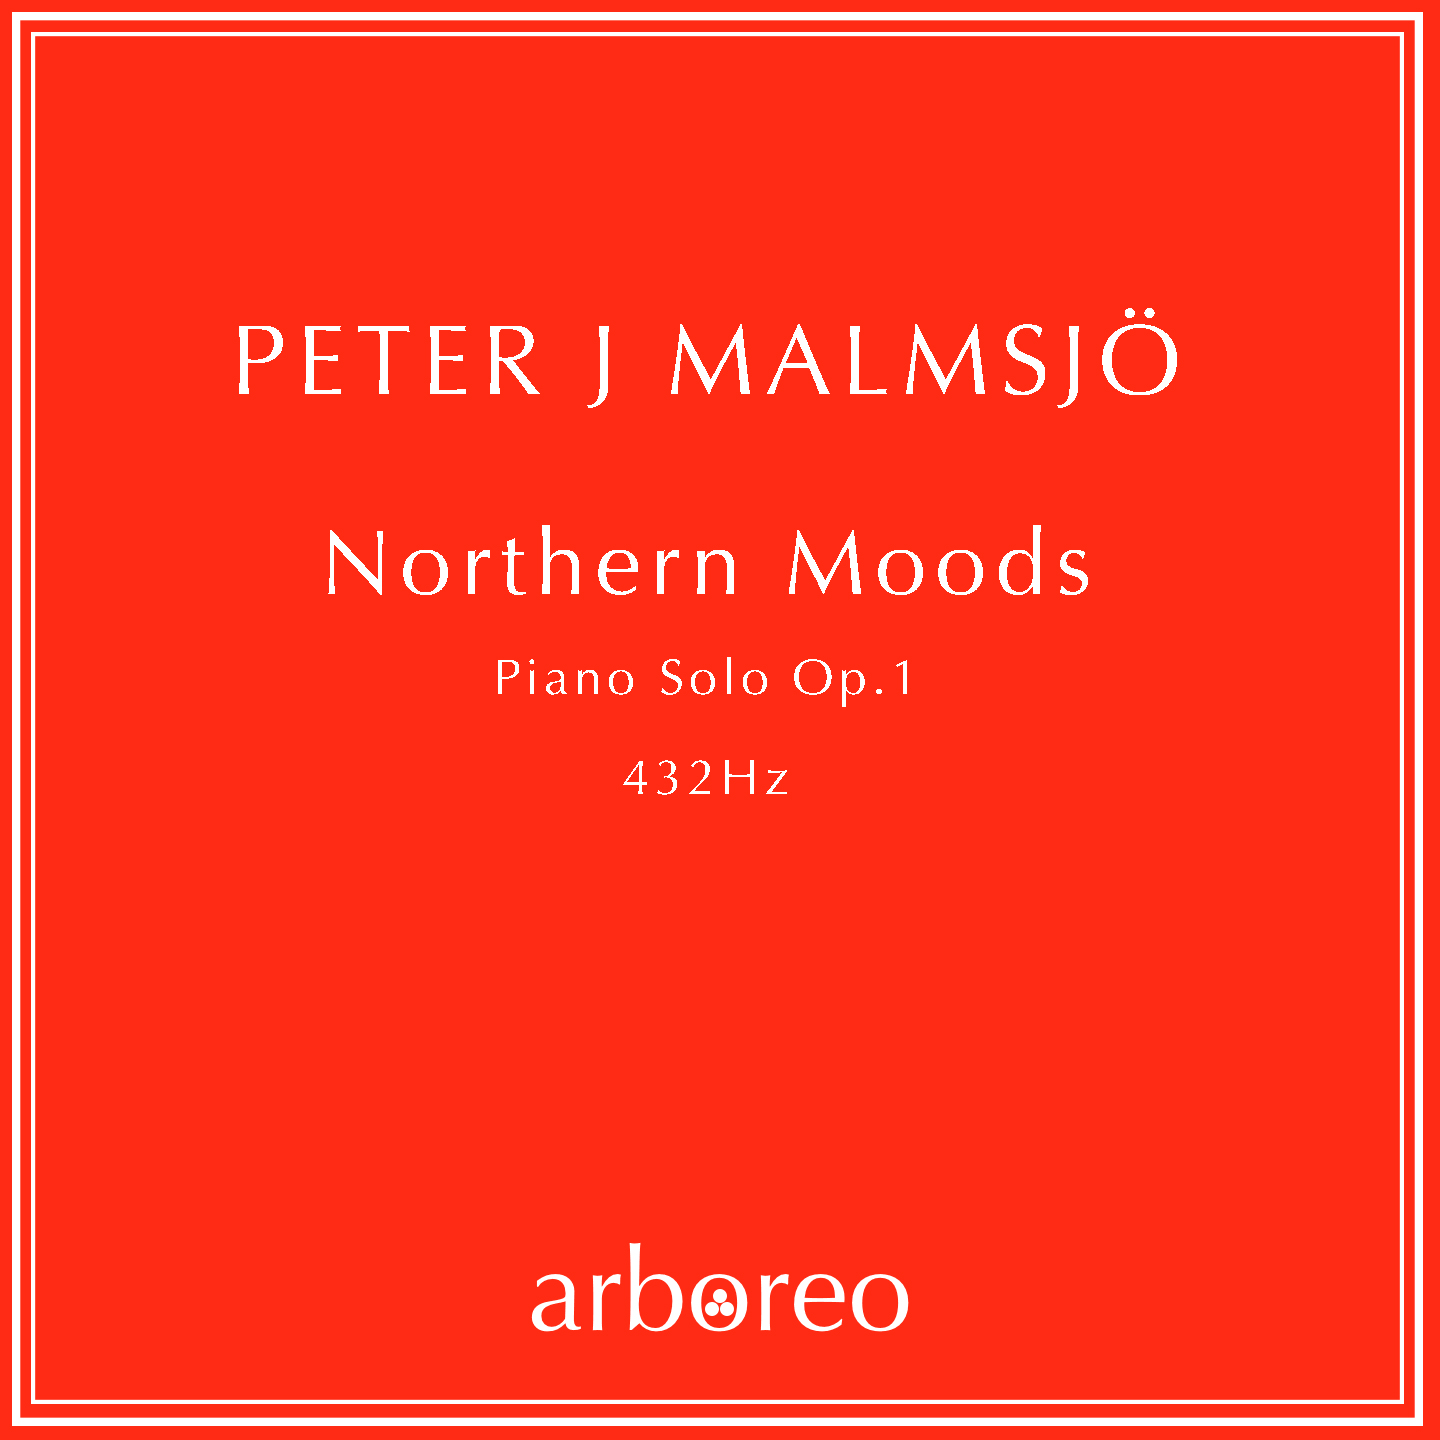 Northern Moods - Piano Solo Op. 1